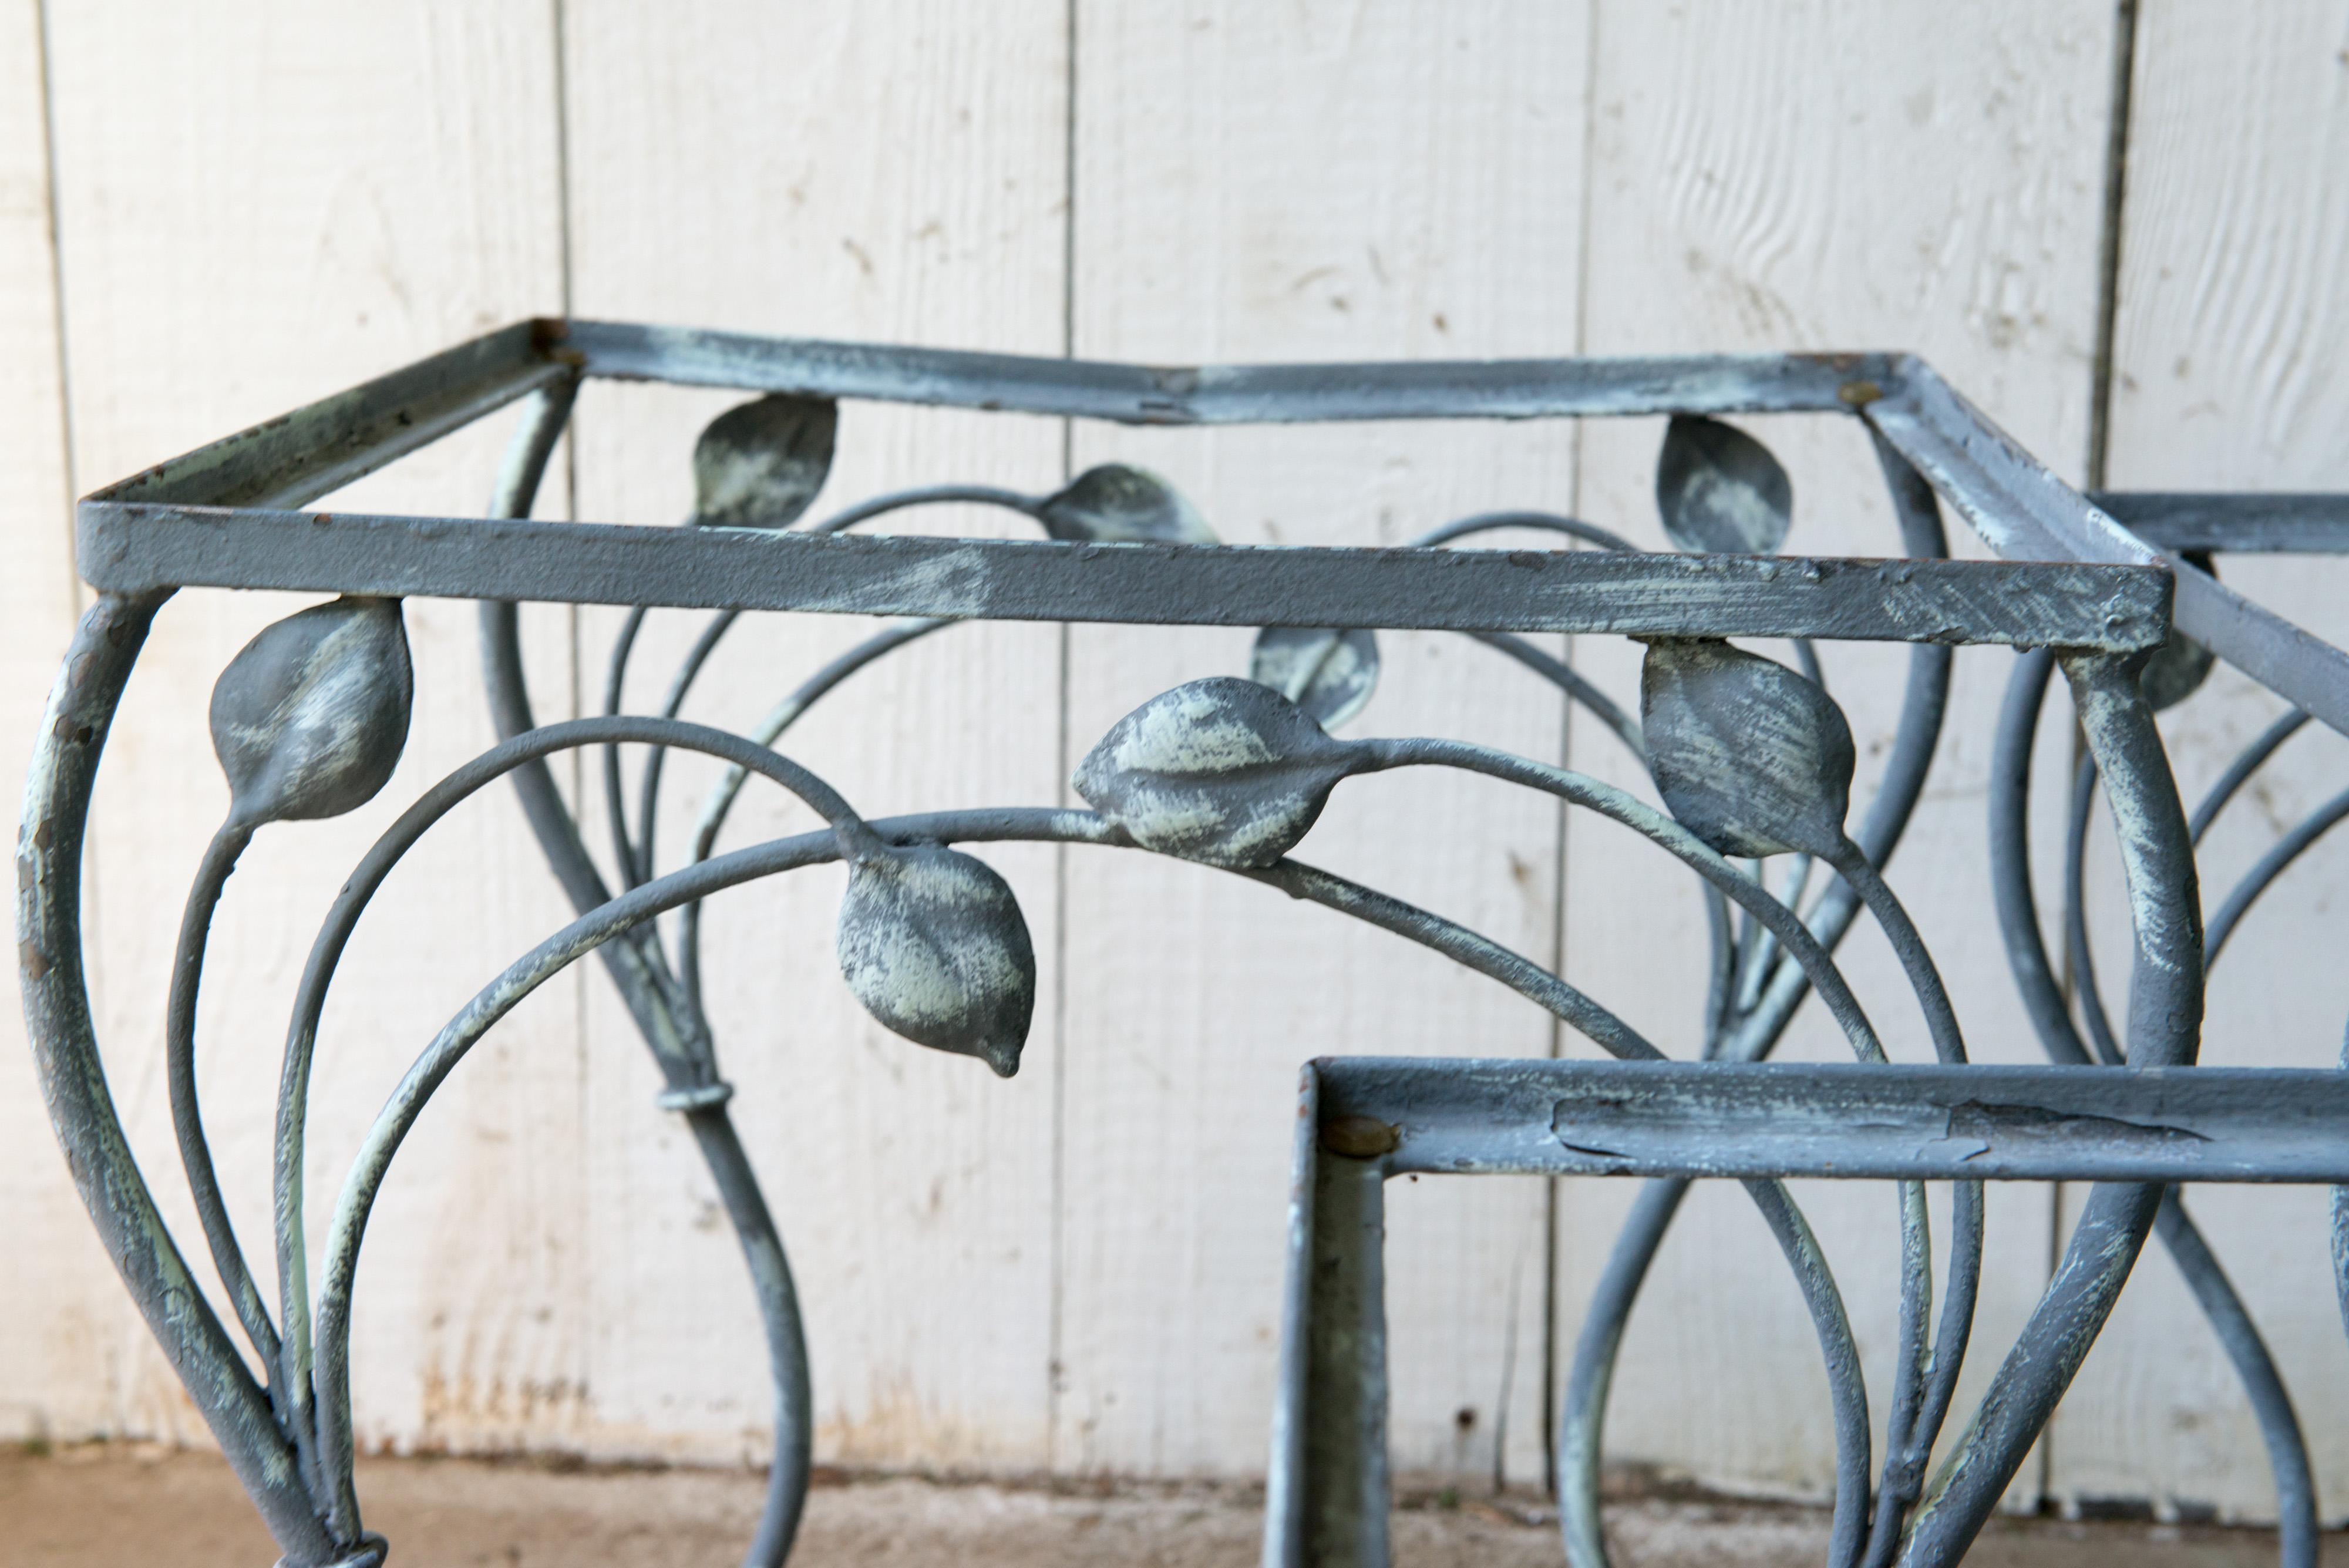 Set of 3 handcrafted wrought iron nesting tables by Salterini. Beautiful, elegant yet strong sturdy pieces. Glass table tops will be included. We have several other pieces of matching Salterini seating pieces.